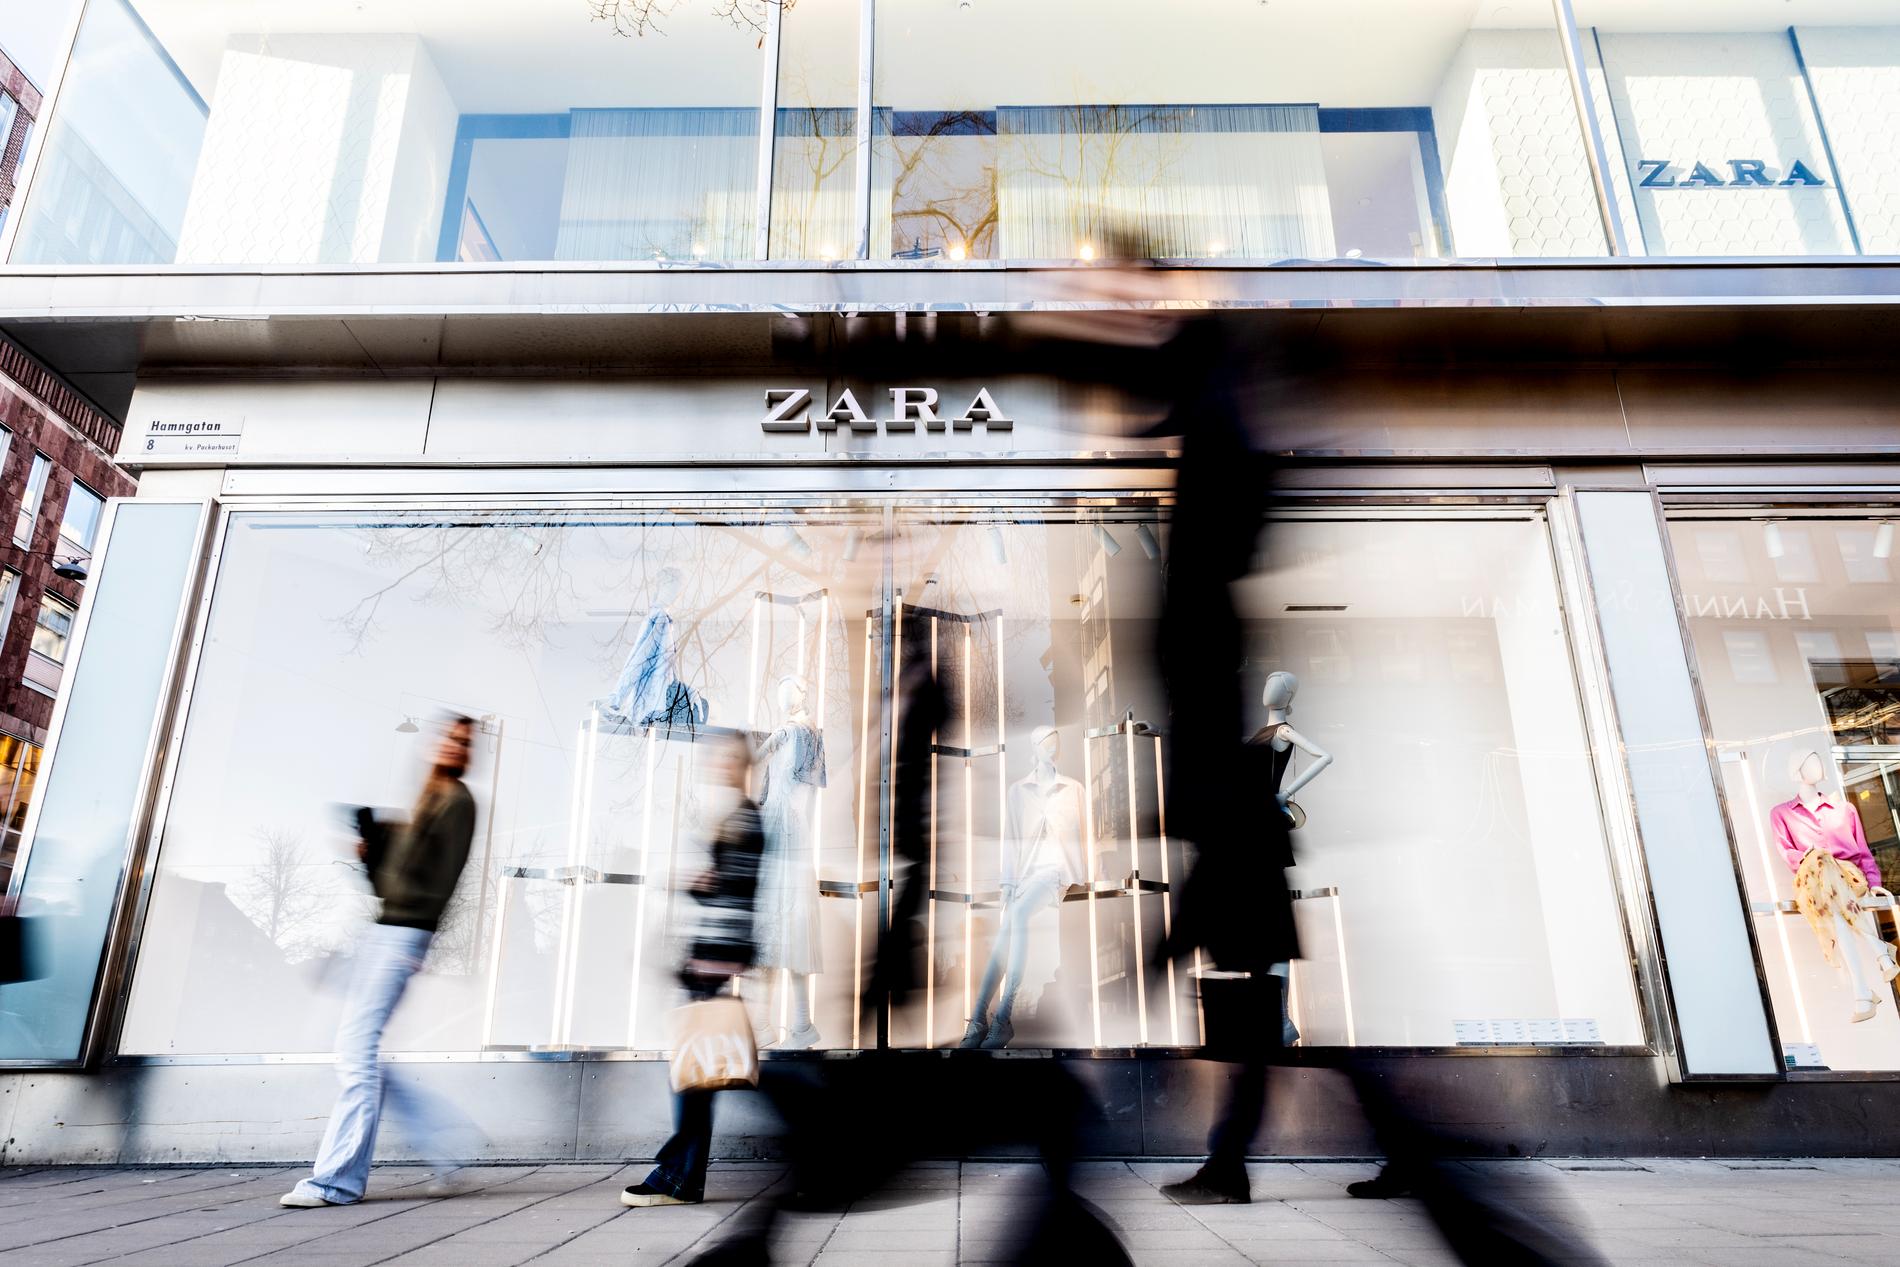 Several of the employees Aftonbladet spoke with describe a robot-like existence at Zara.